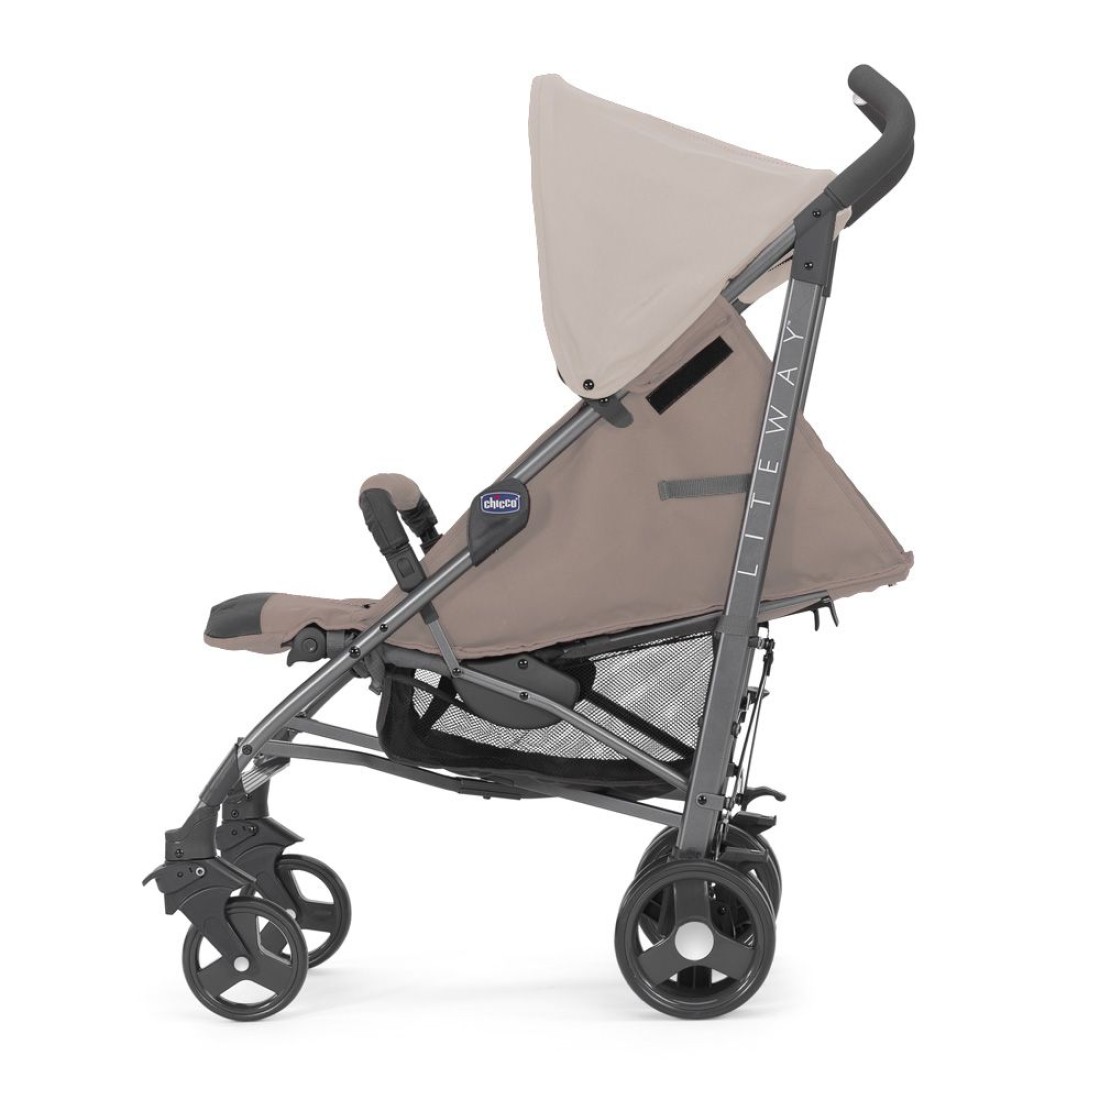 Chicco way. Прогулочная коляска Chicco Lite way. Chicco Lite way 2. Коляска Чикко трость Lite way. Коляска Chicco Lite way 2.